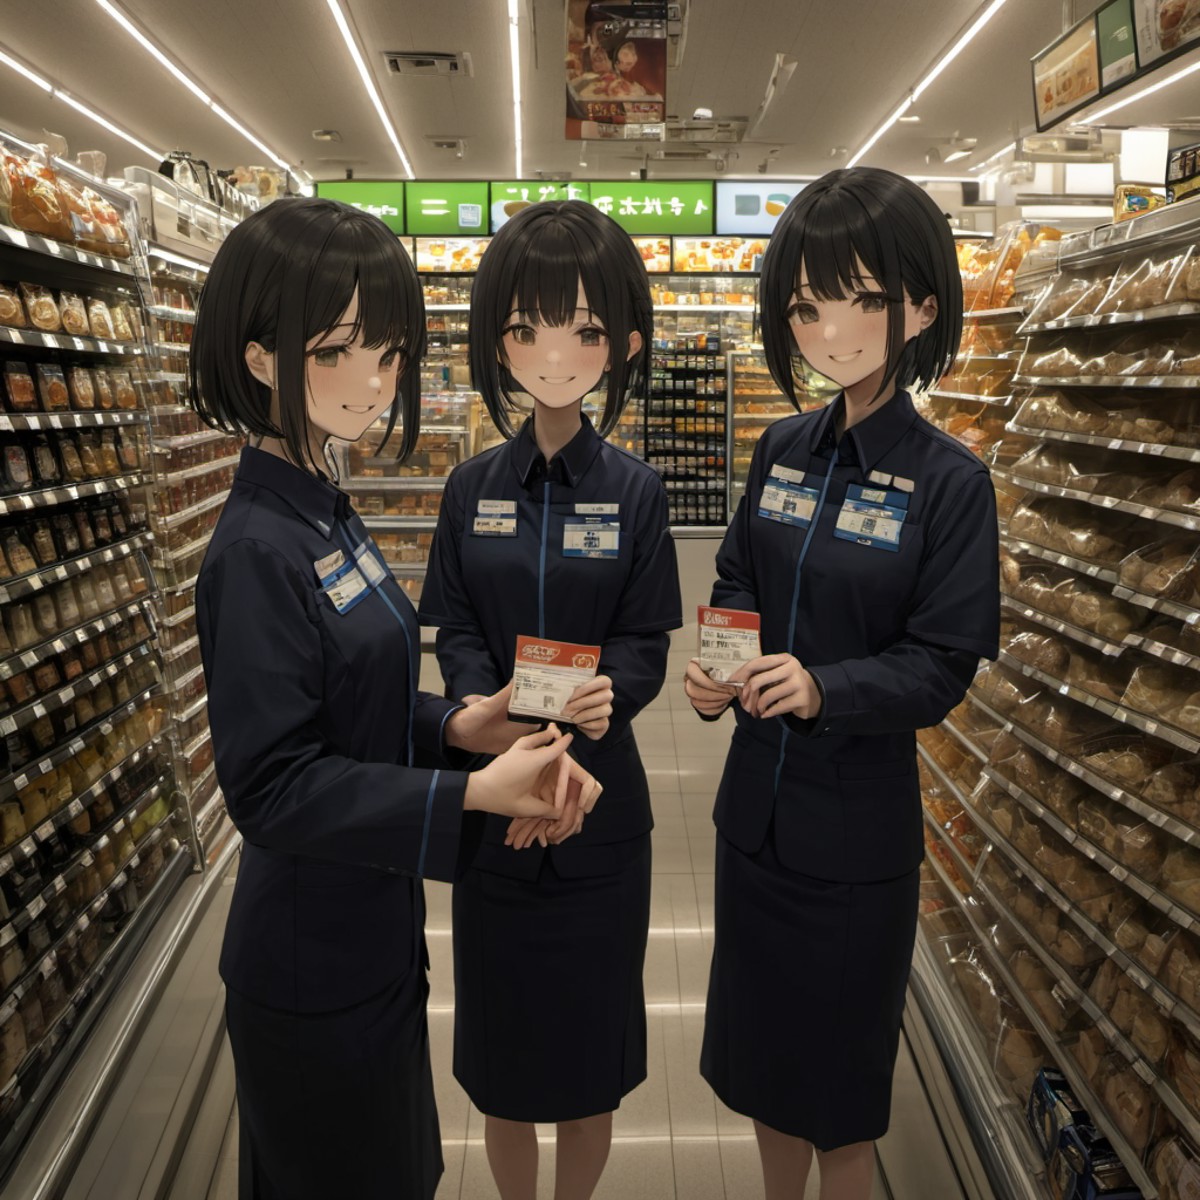 cinematic still best quality, ultra-detailed,
famimaU, employee uniform, japan, 2girls, convenience store, shop, glasses, ...